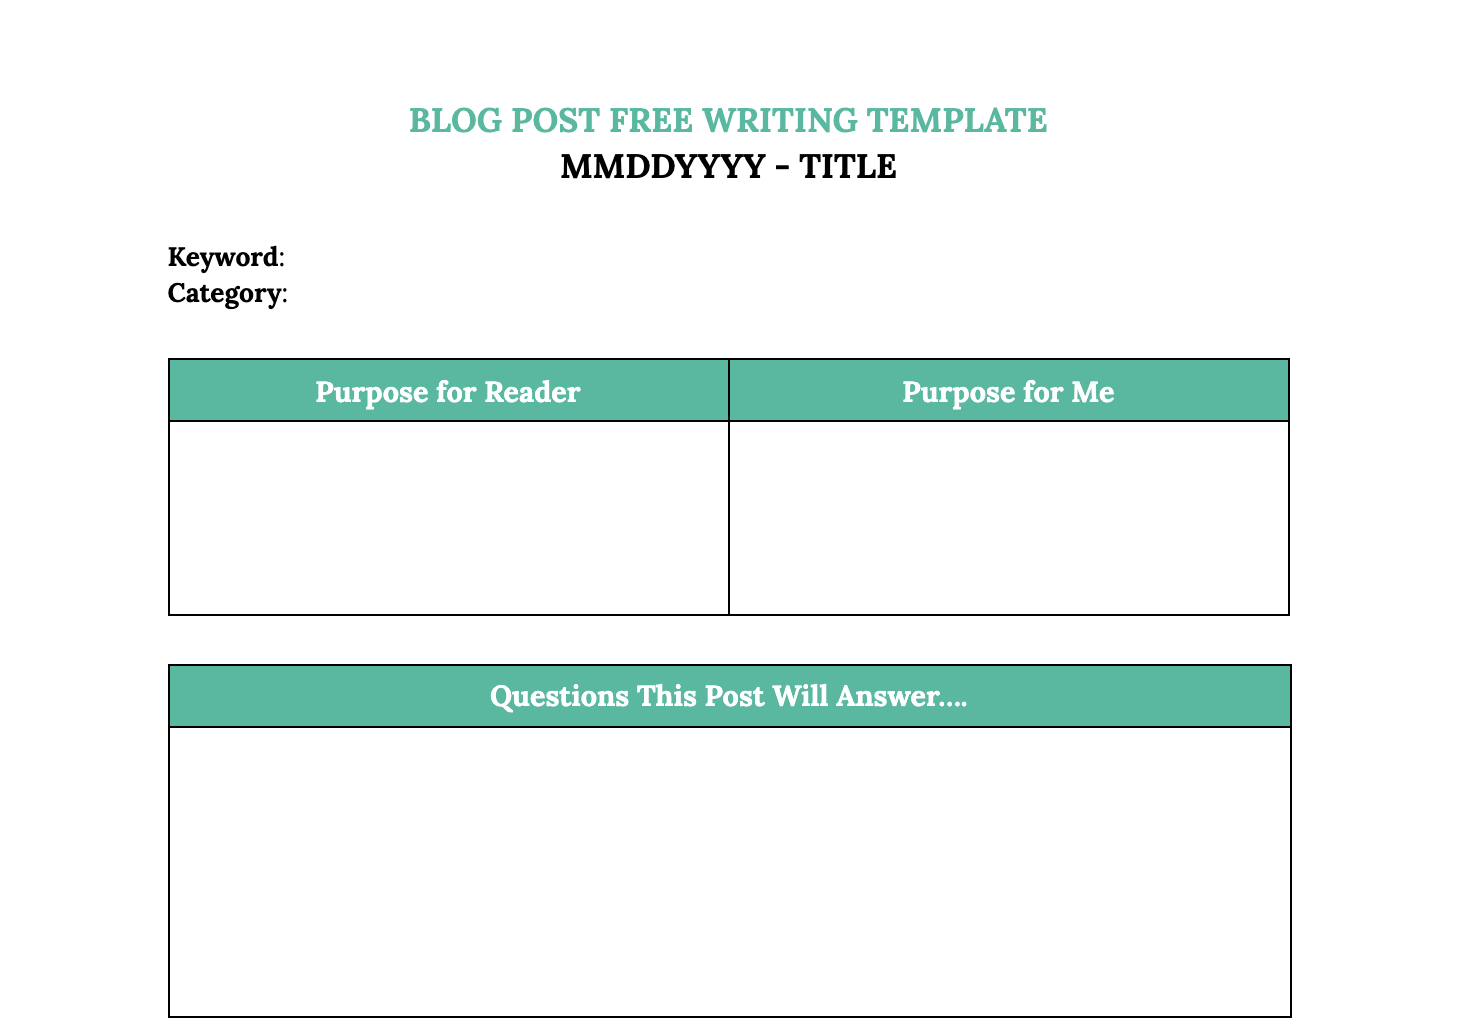 Quarterly Content Batching Workflow - Free Writing Template